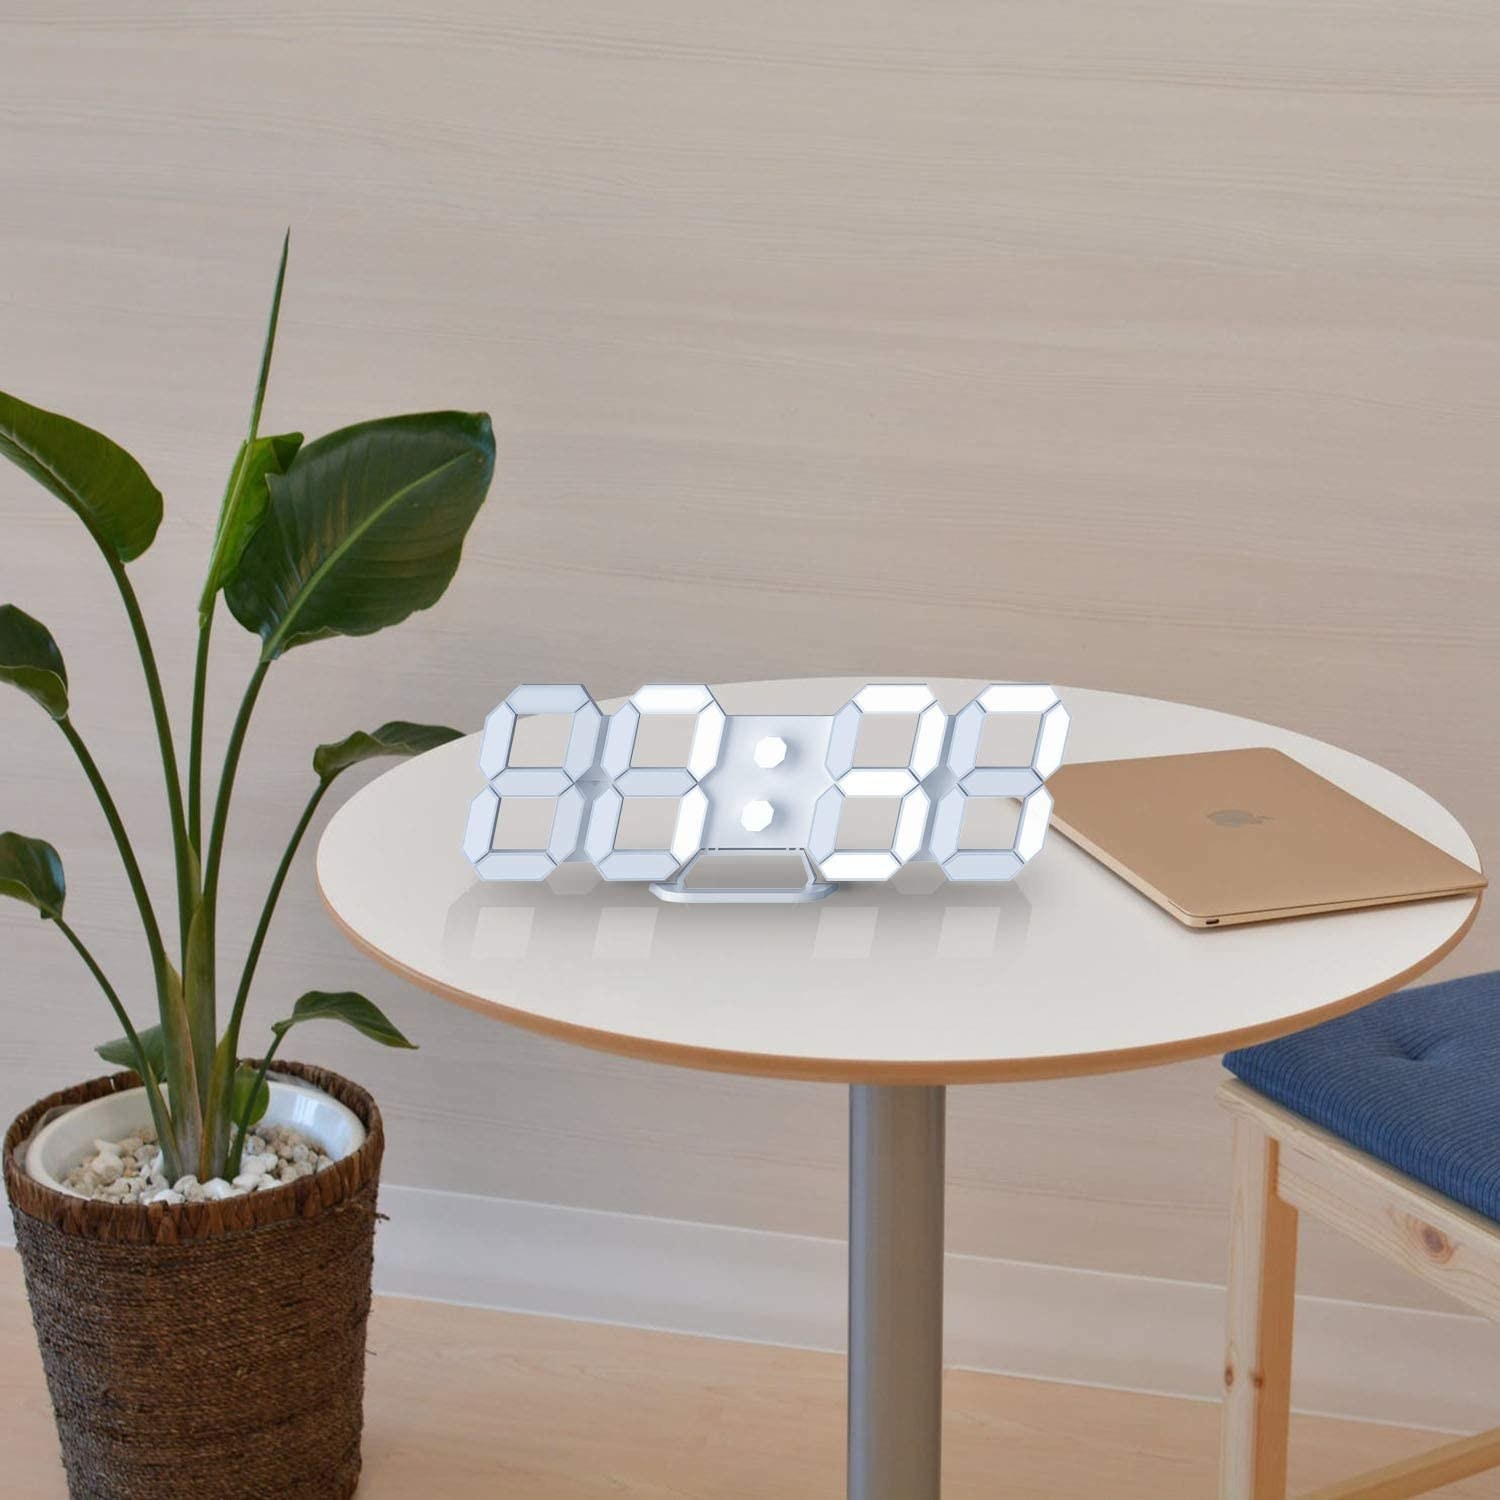 The clock on a table next to a plant